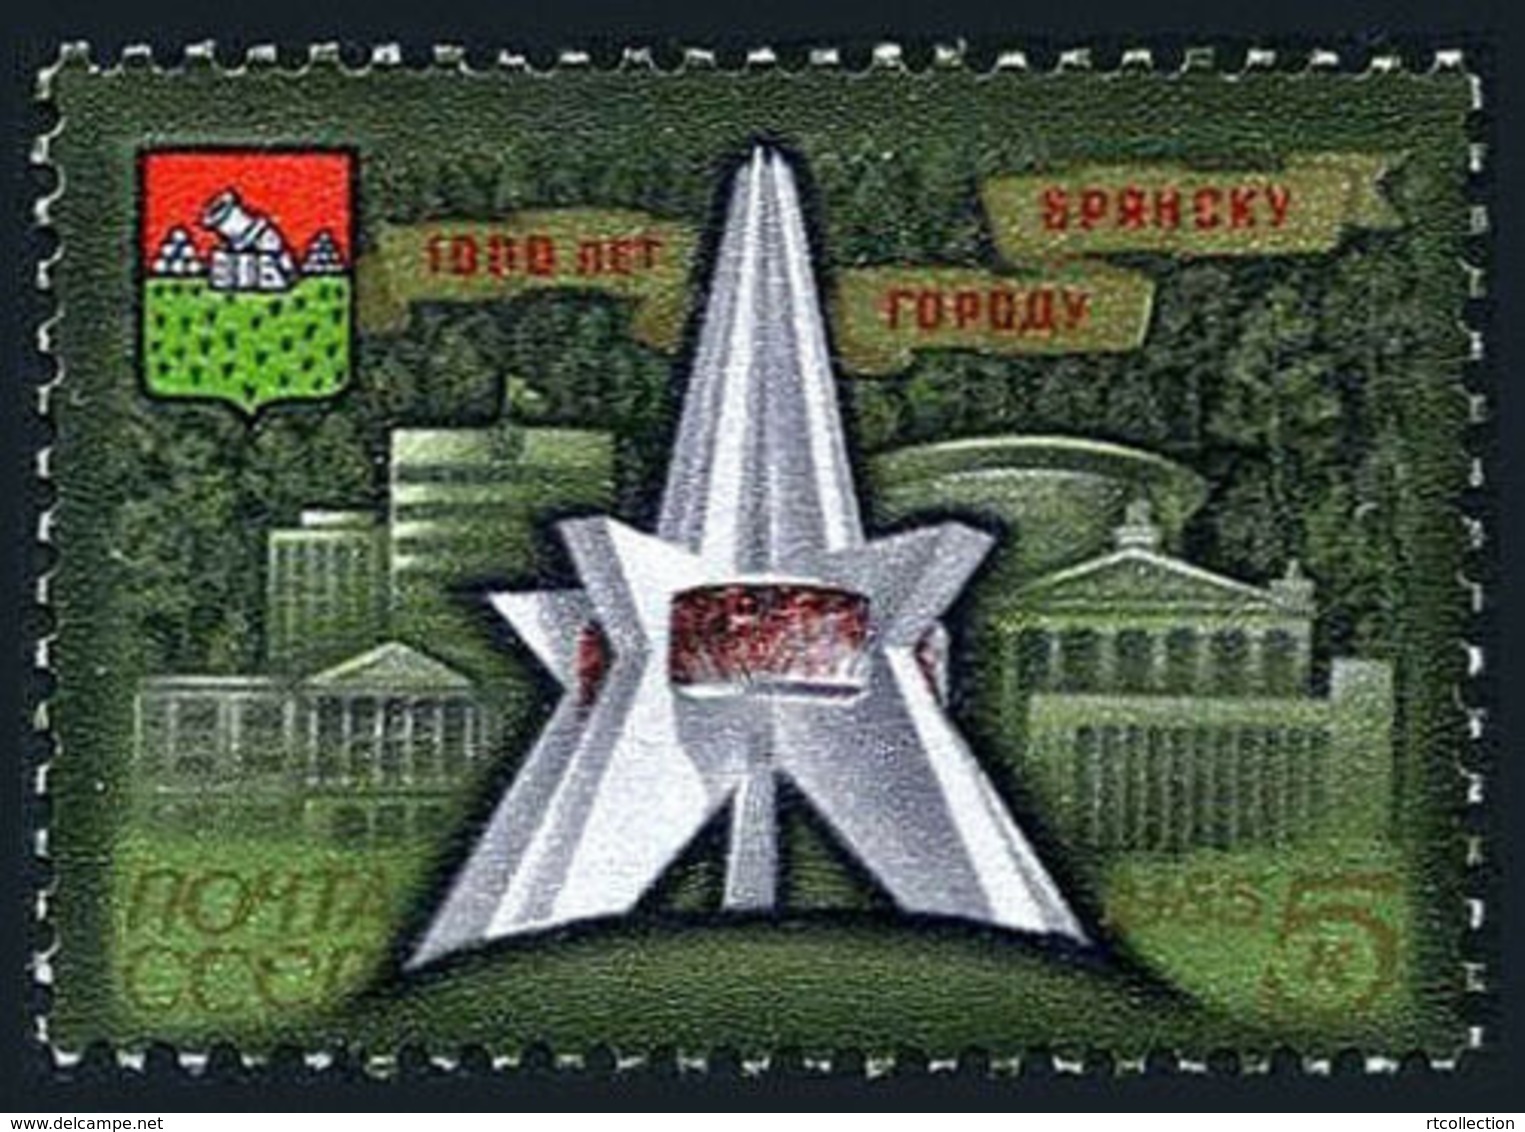 USSR Russia 1985 Millenary Bryansk Immortality Monument Buildings Architecture History Geography Stamp MNH Michel 5547 - Monuments